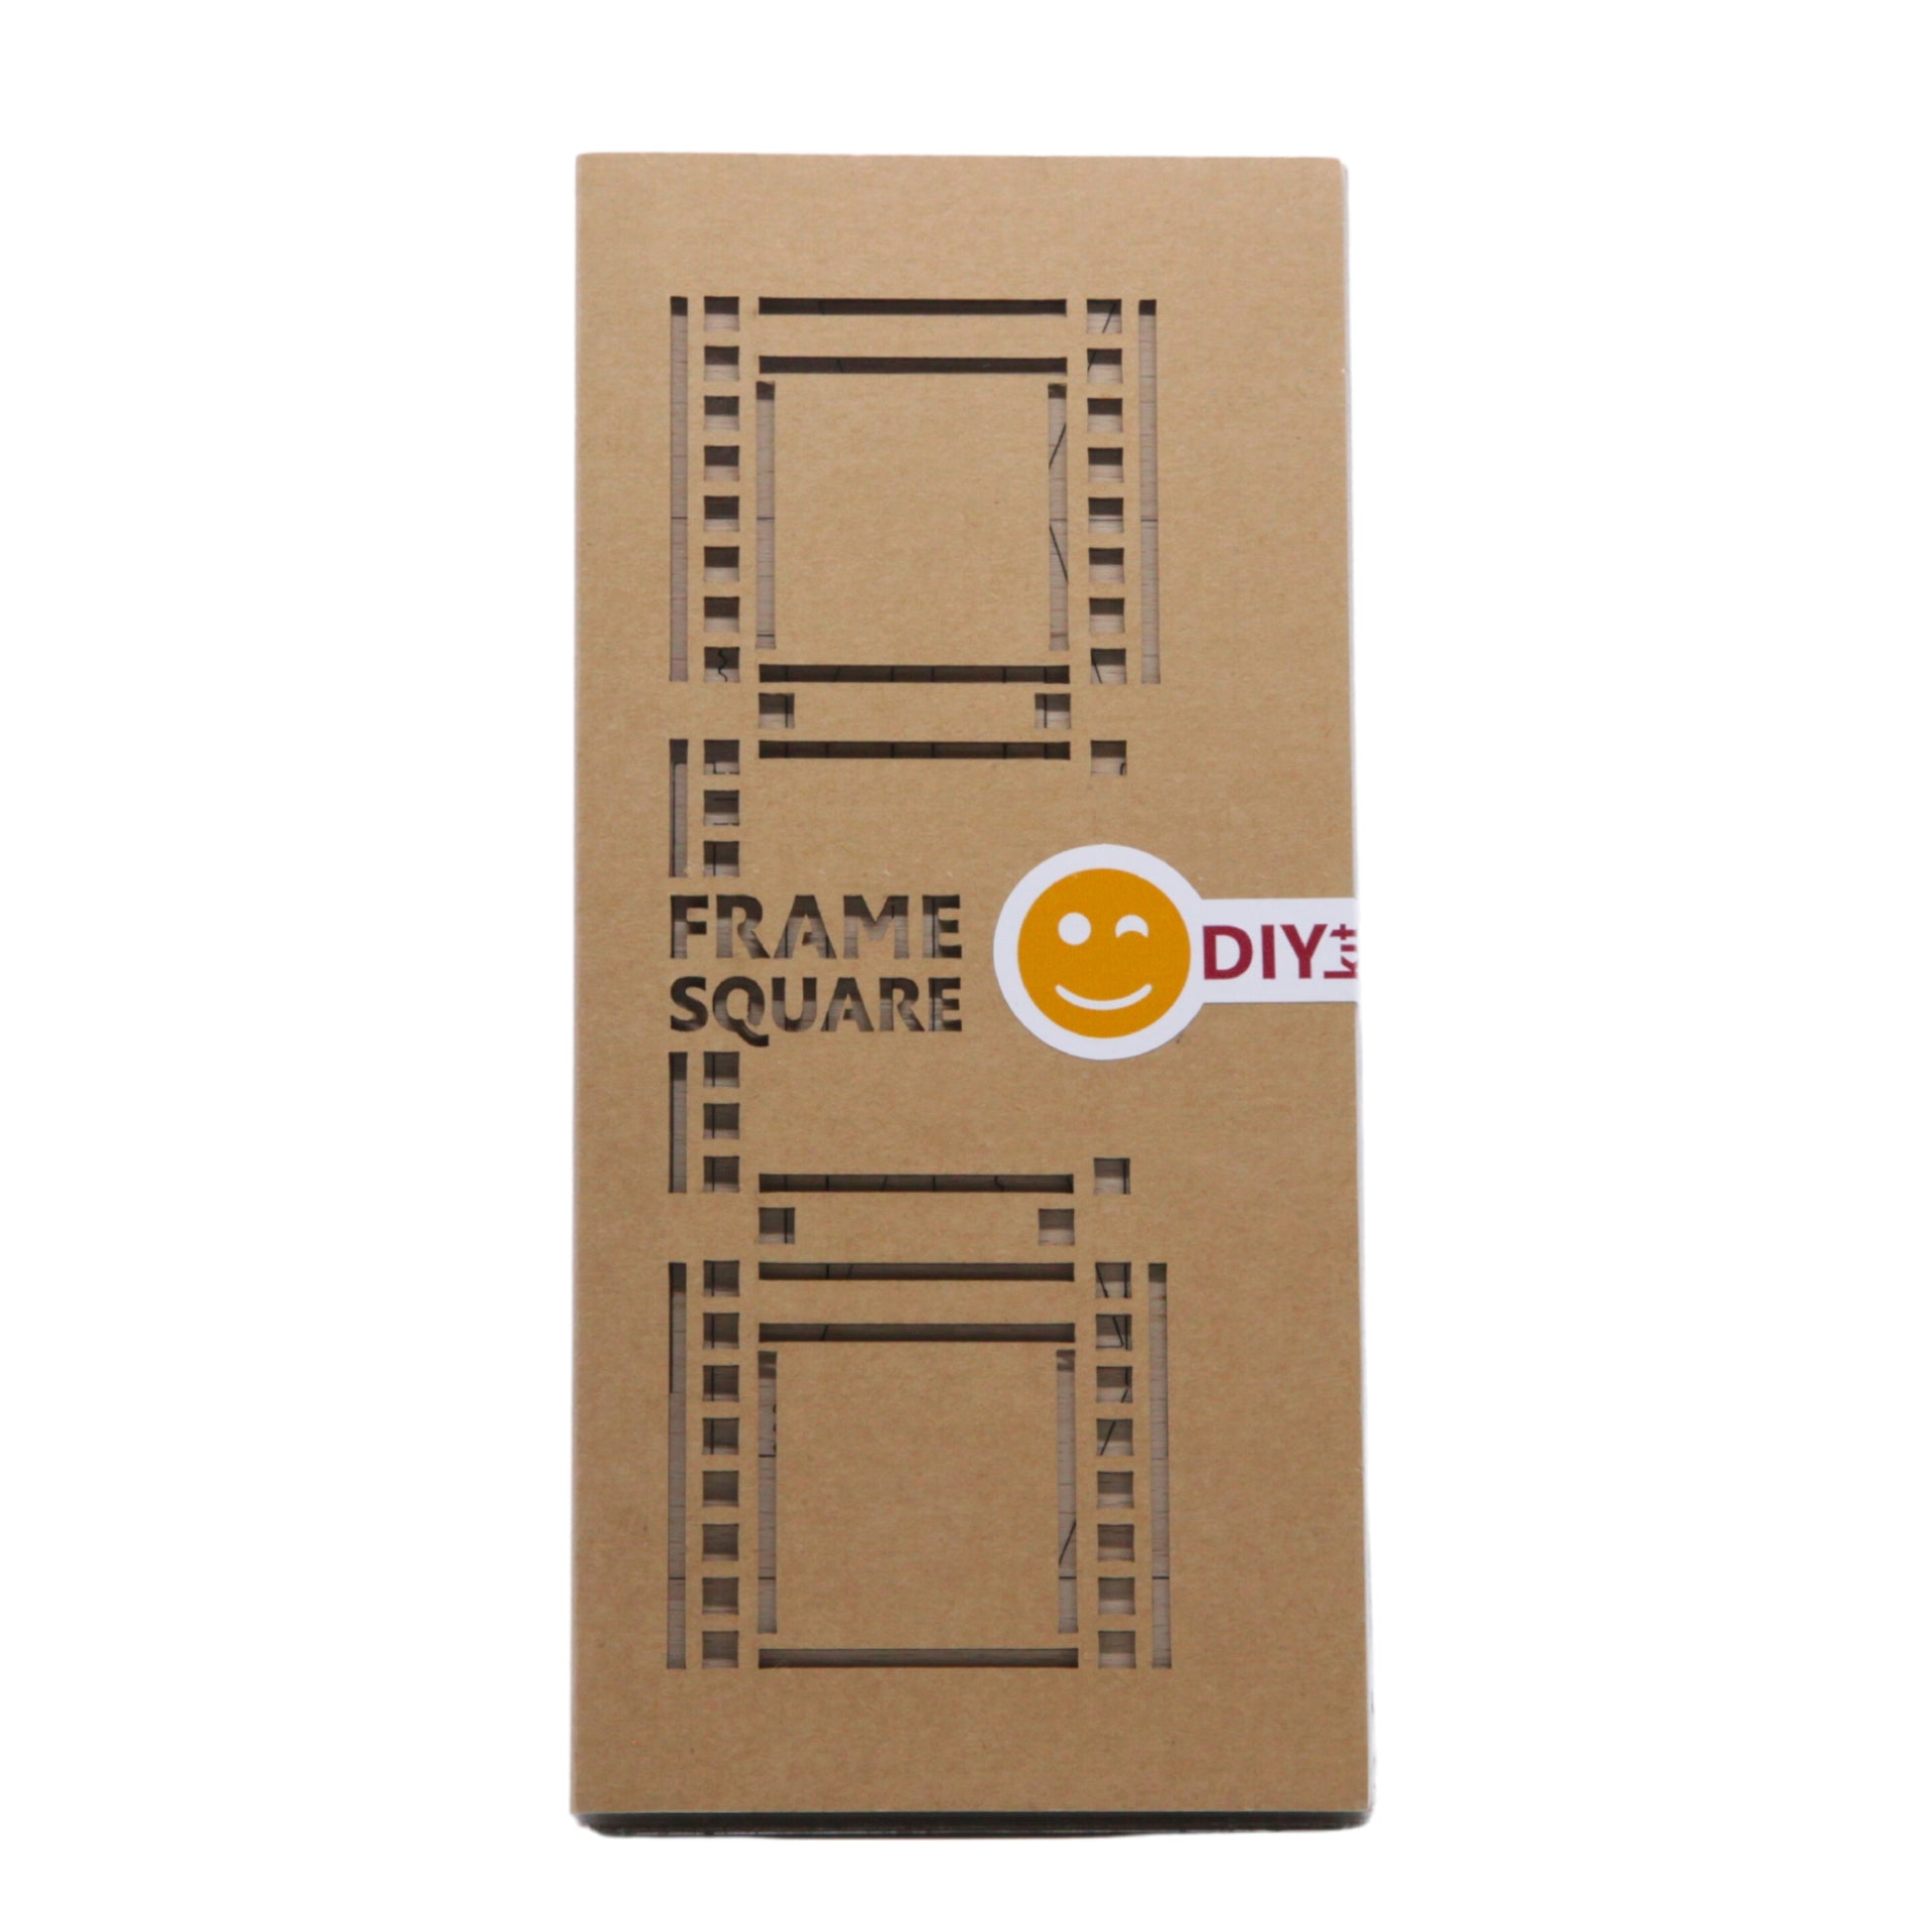 A packed set of three Natural plywood interconnectable Instax SQUARE film photo frames for instant SQUARE photos.